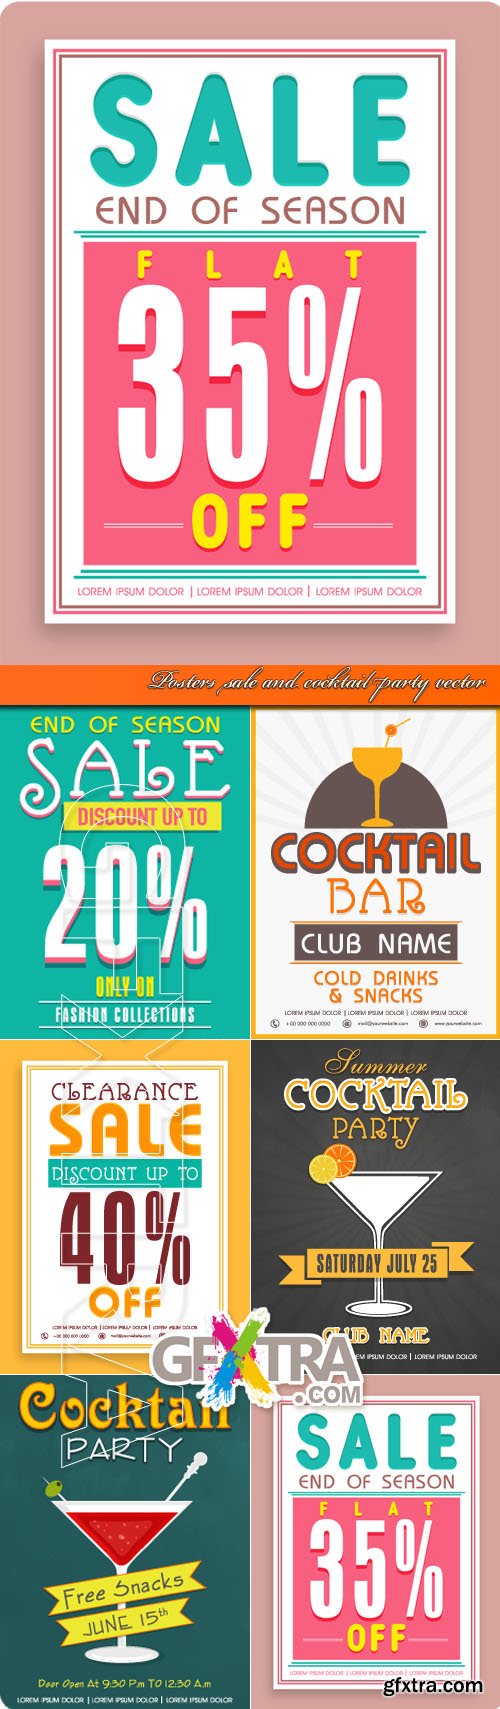 Posters sale and cocktail party vector